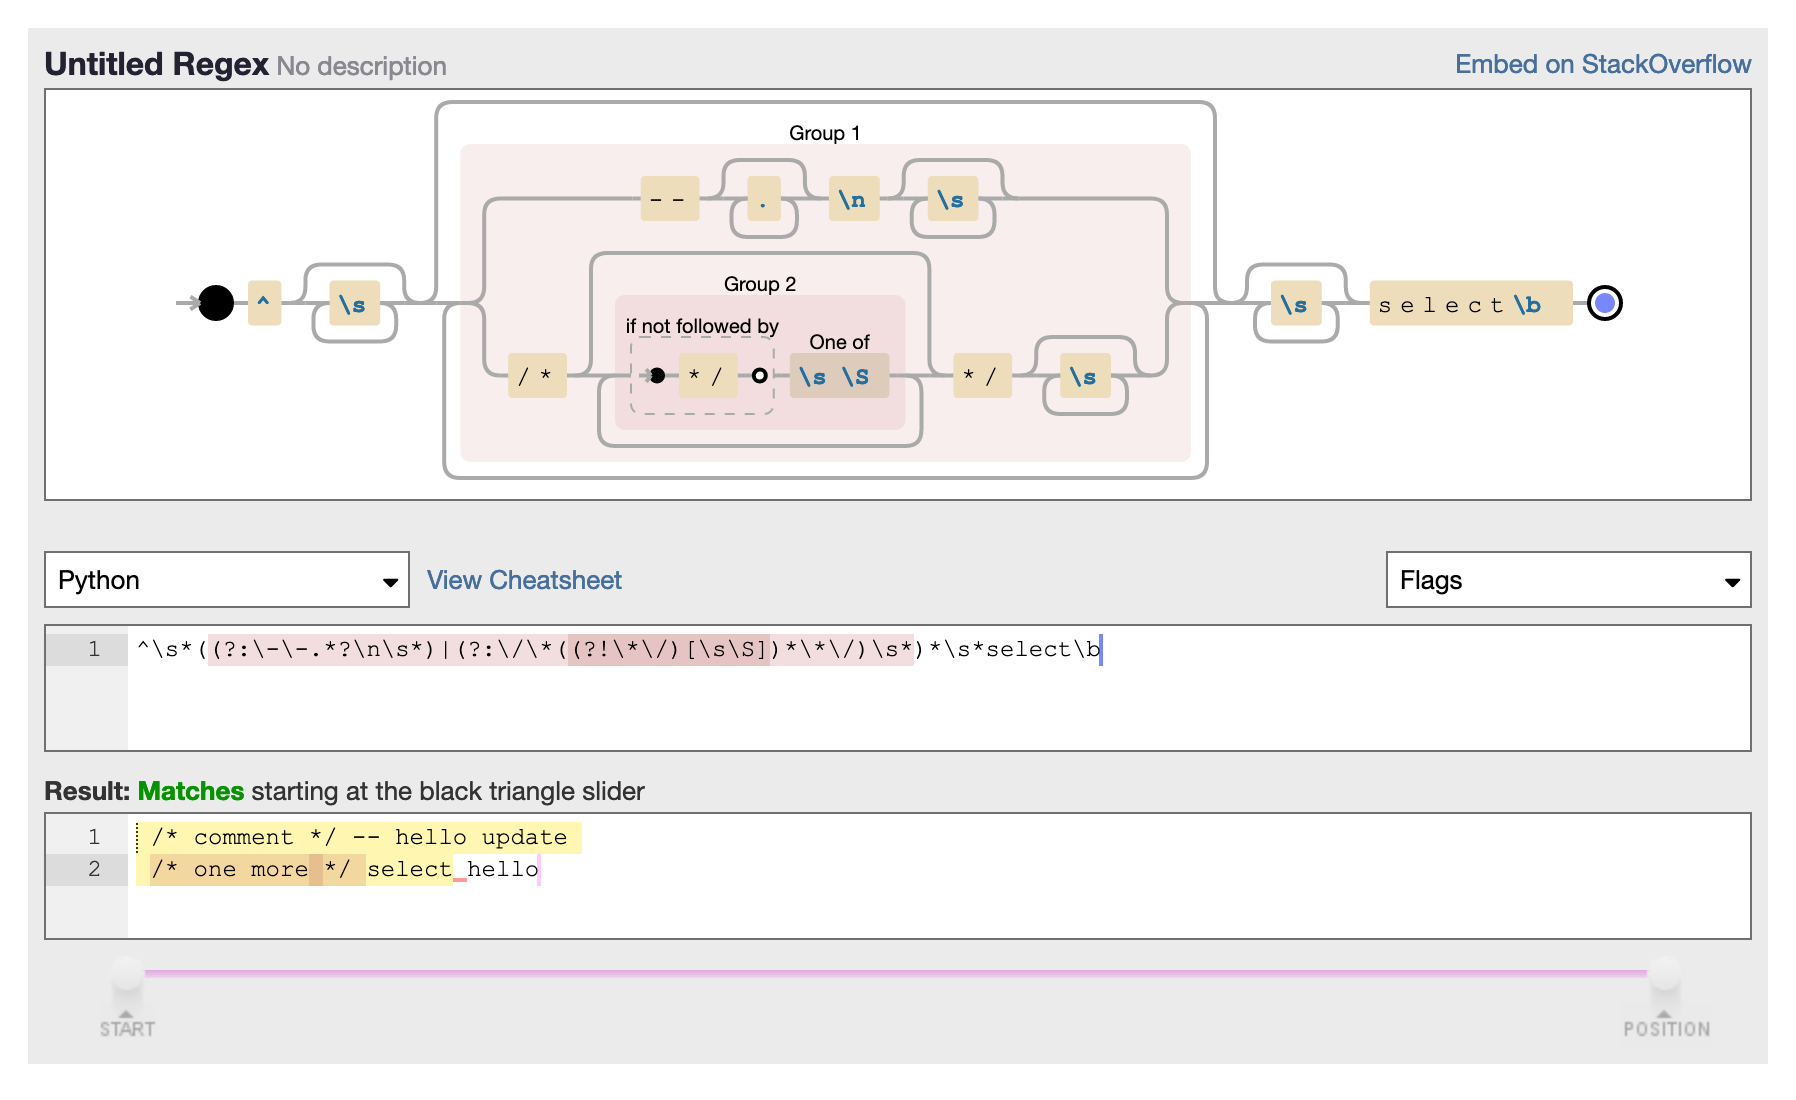 Screenshot of the debuggex interface showing a diagram that illustrates the regular expression